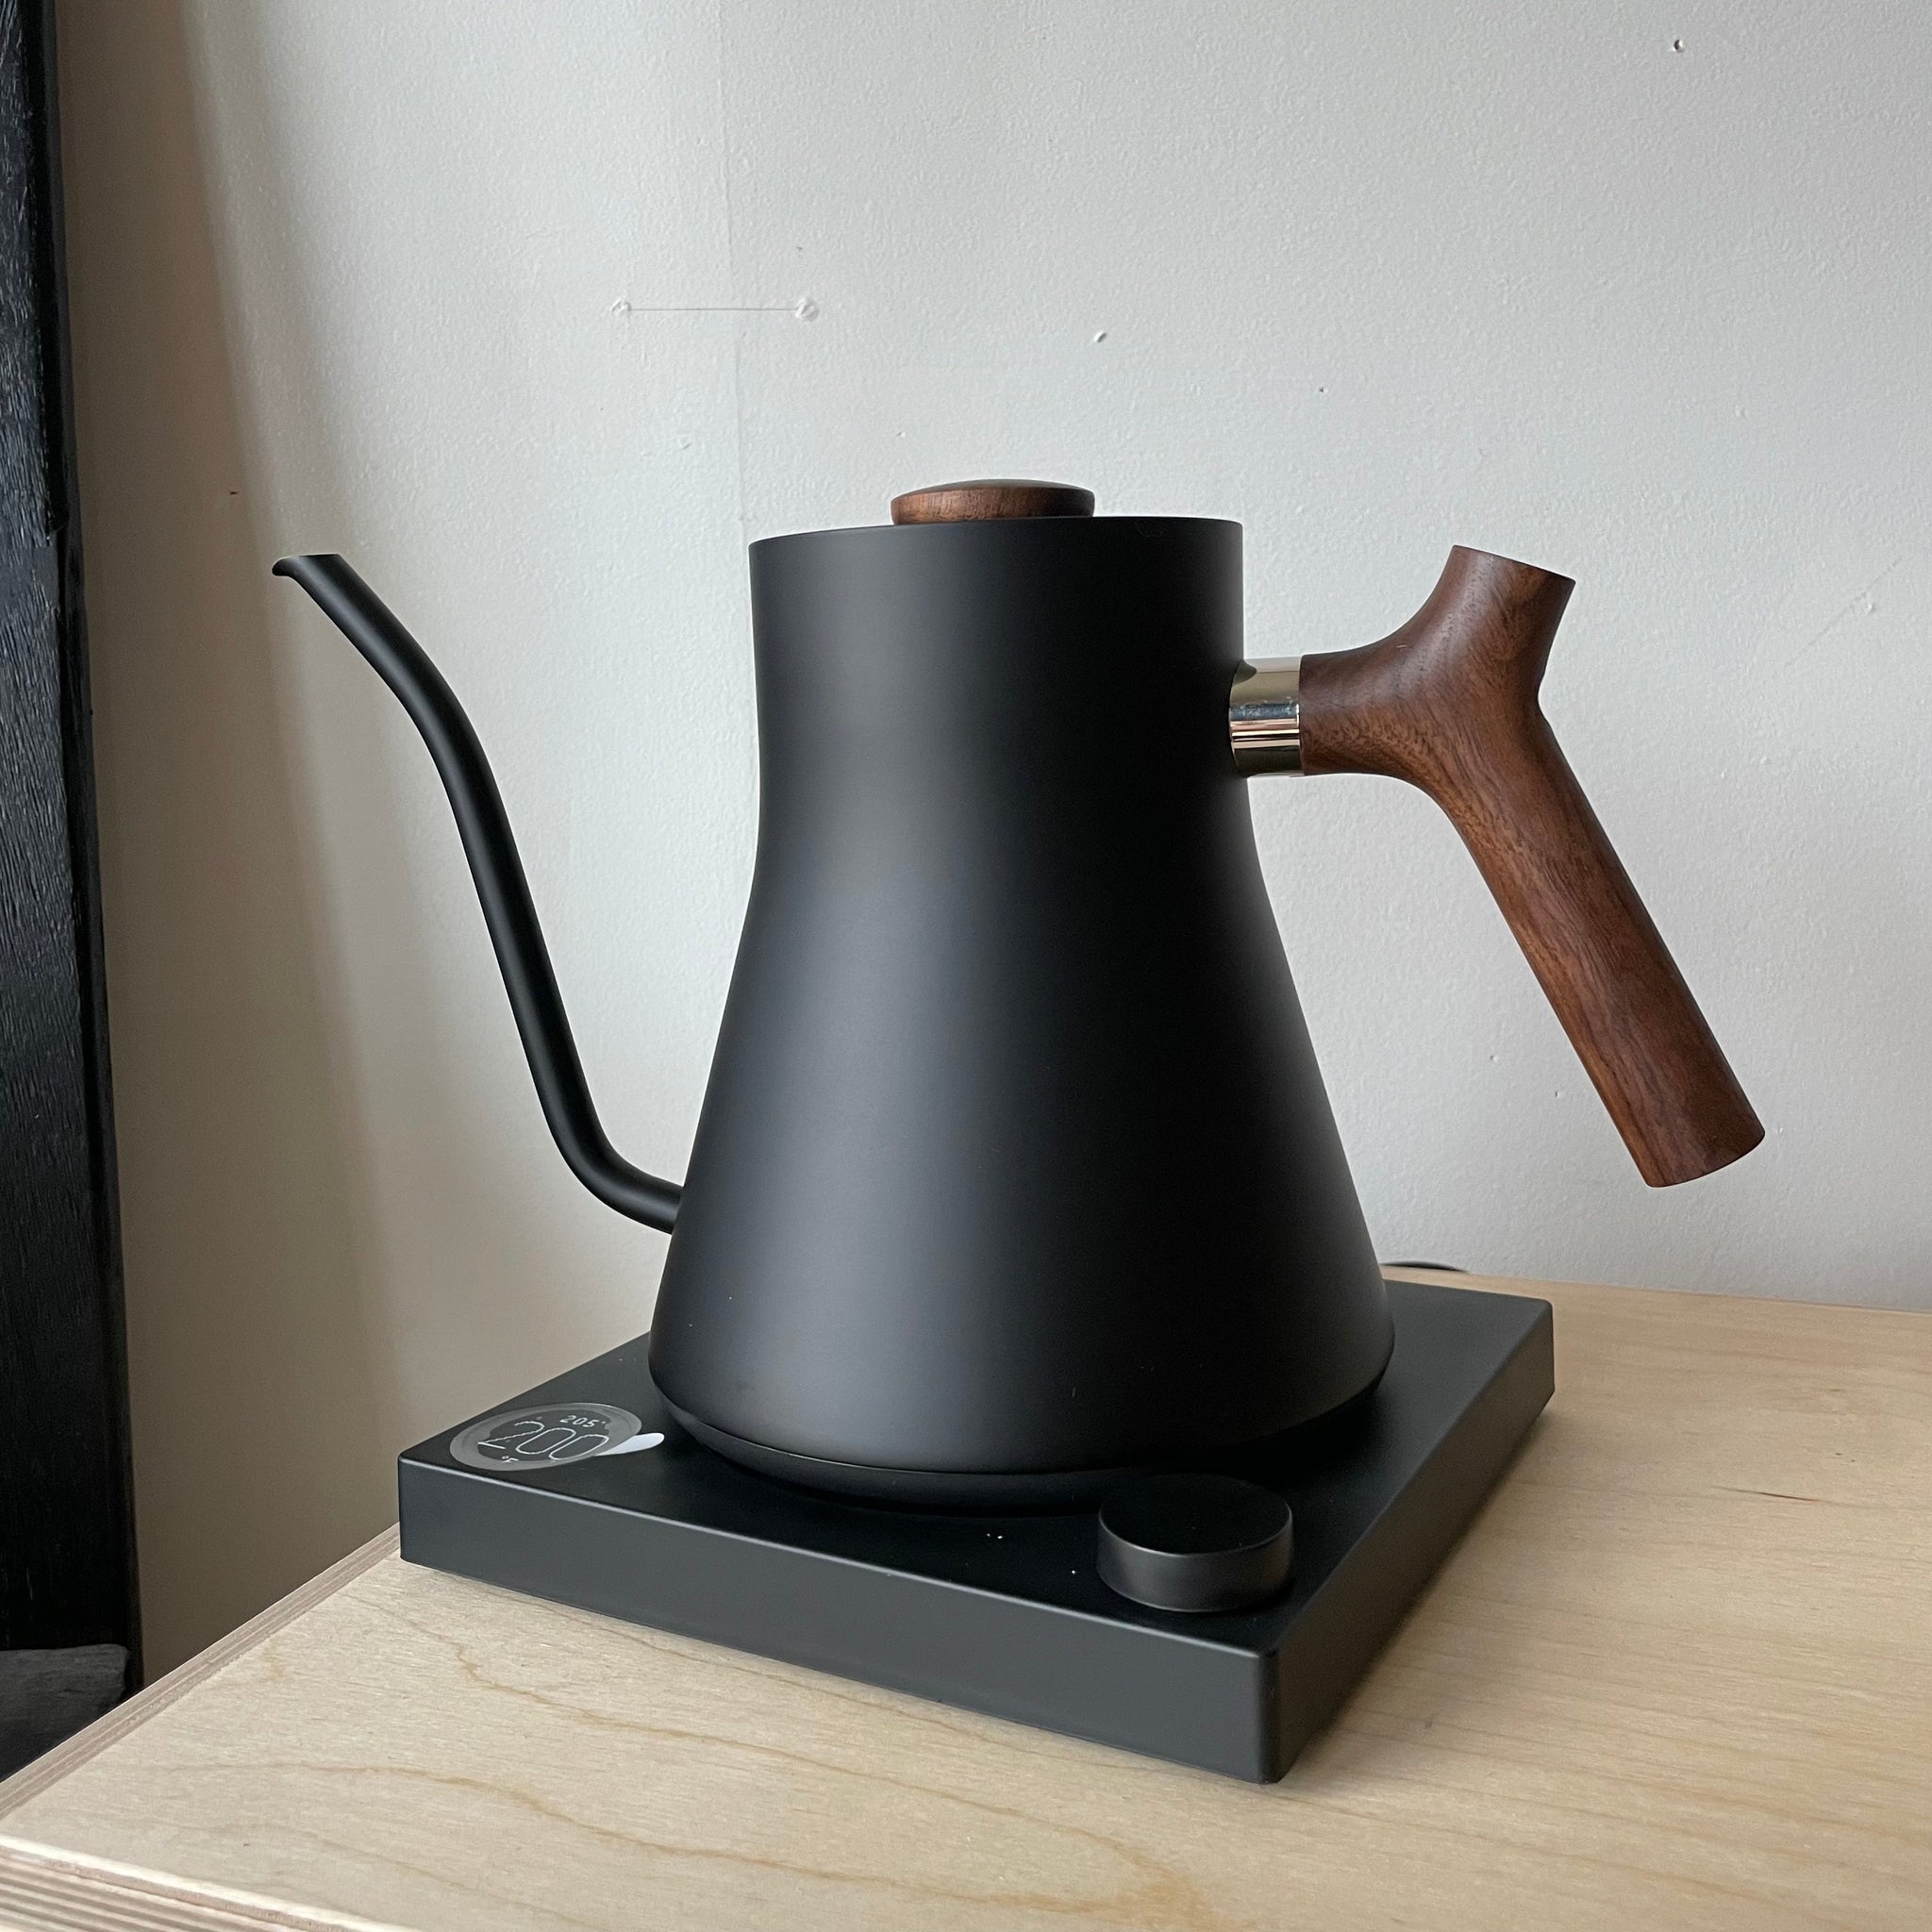 The Stagg EKG Kettle — Tools and Toys